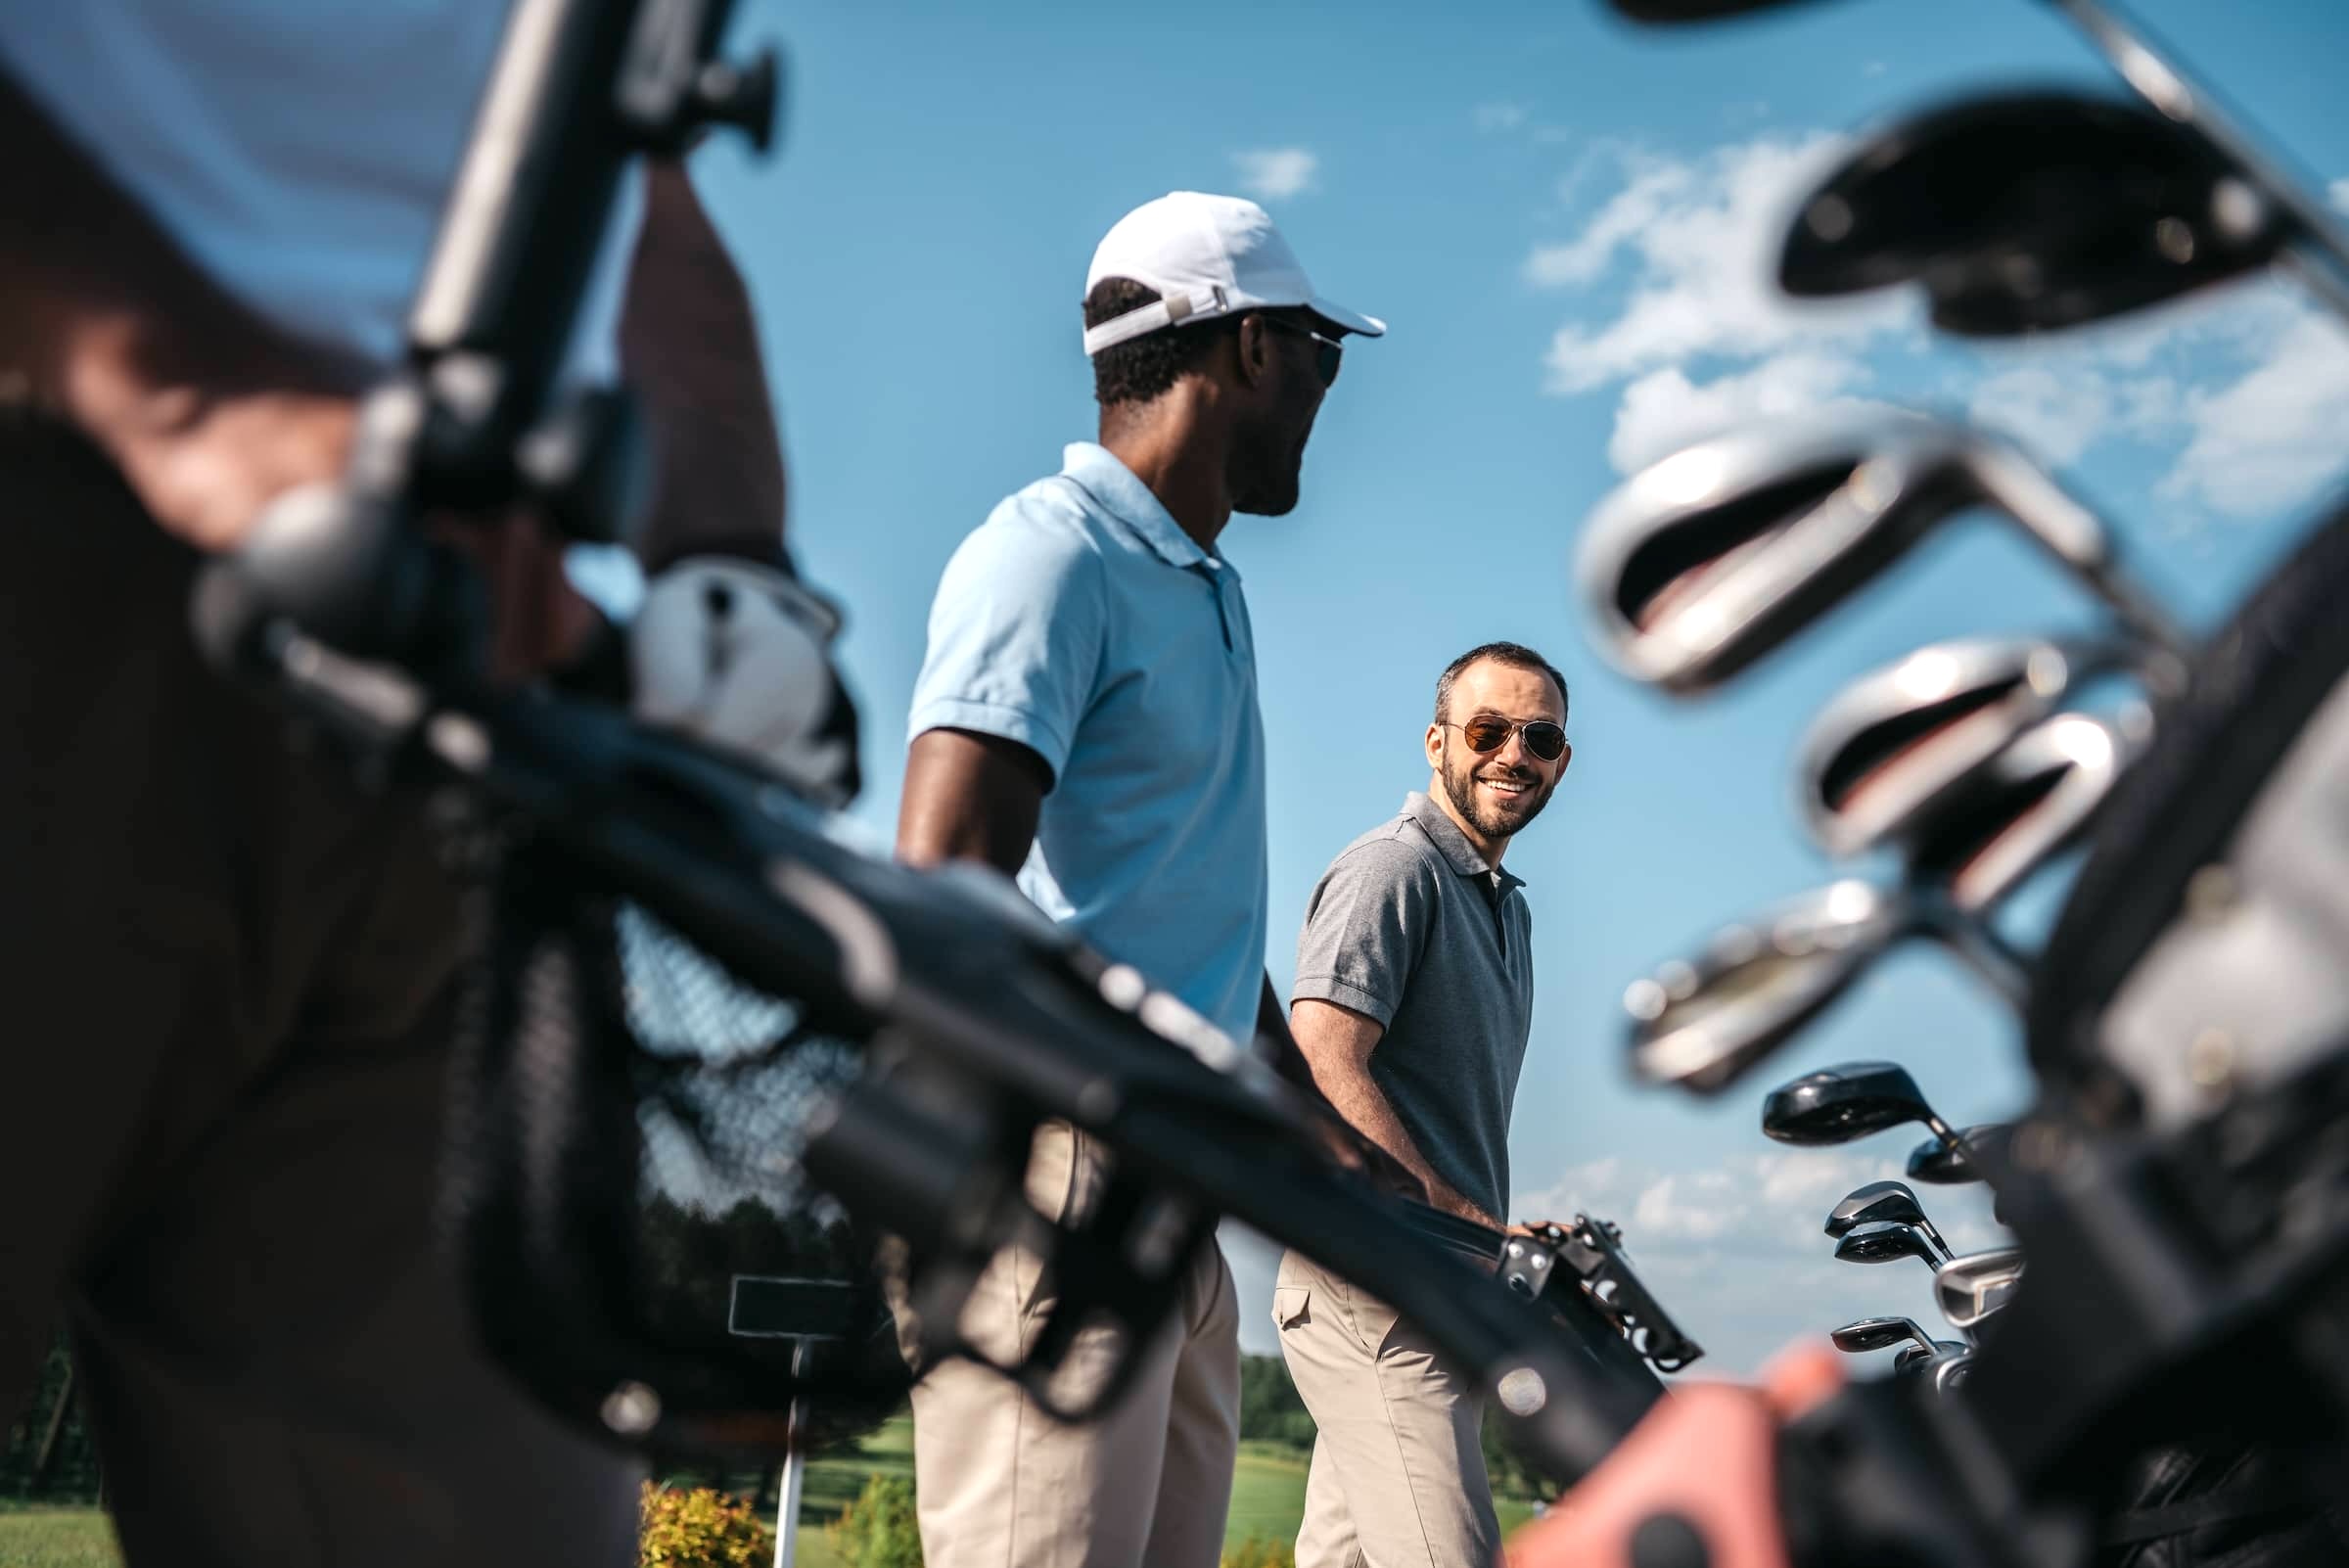 Smiling-players-going-to-the-golf-course-bag-with-clubs-at-foreground